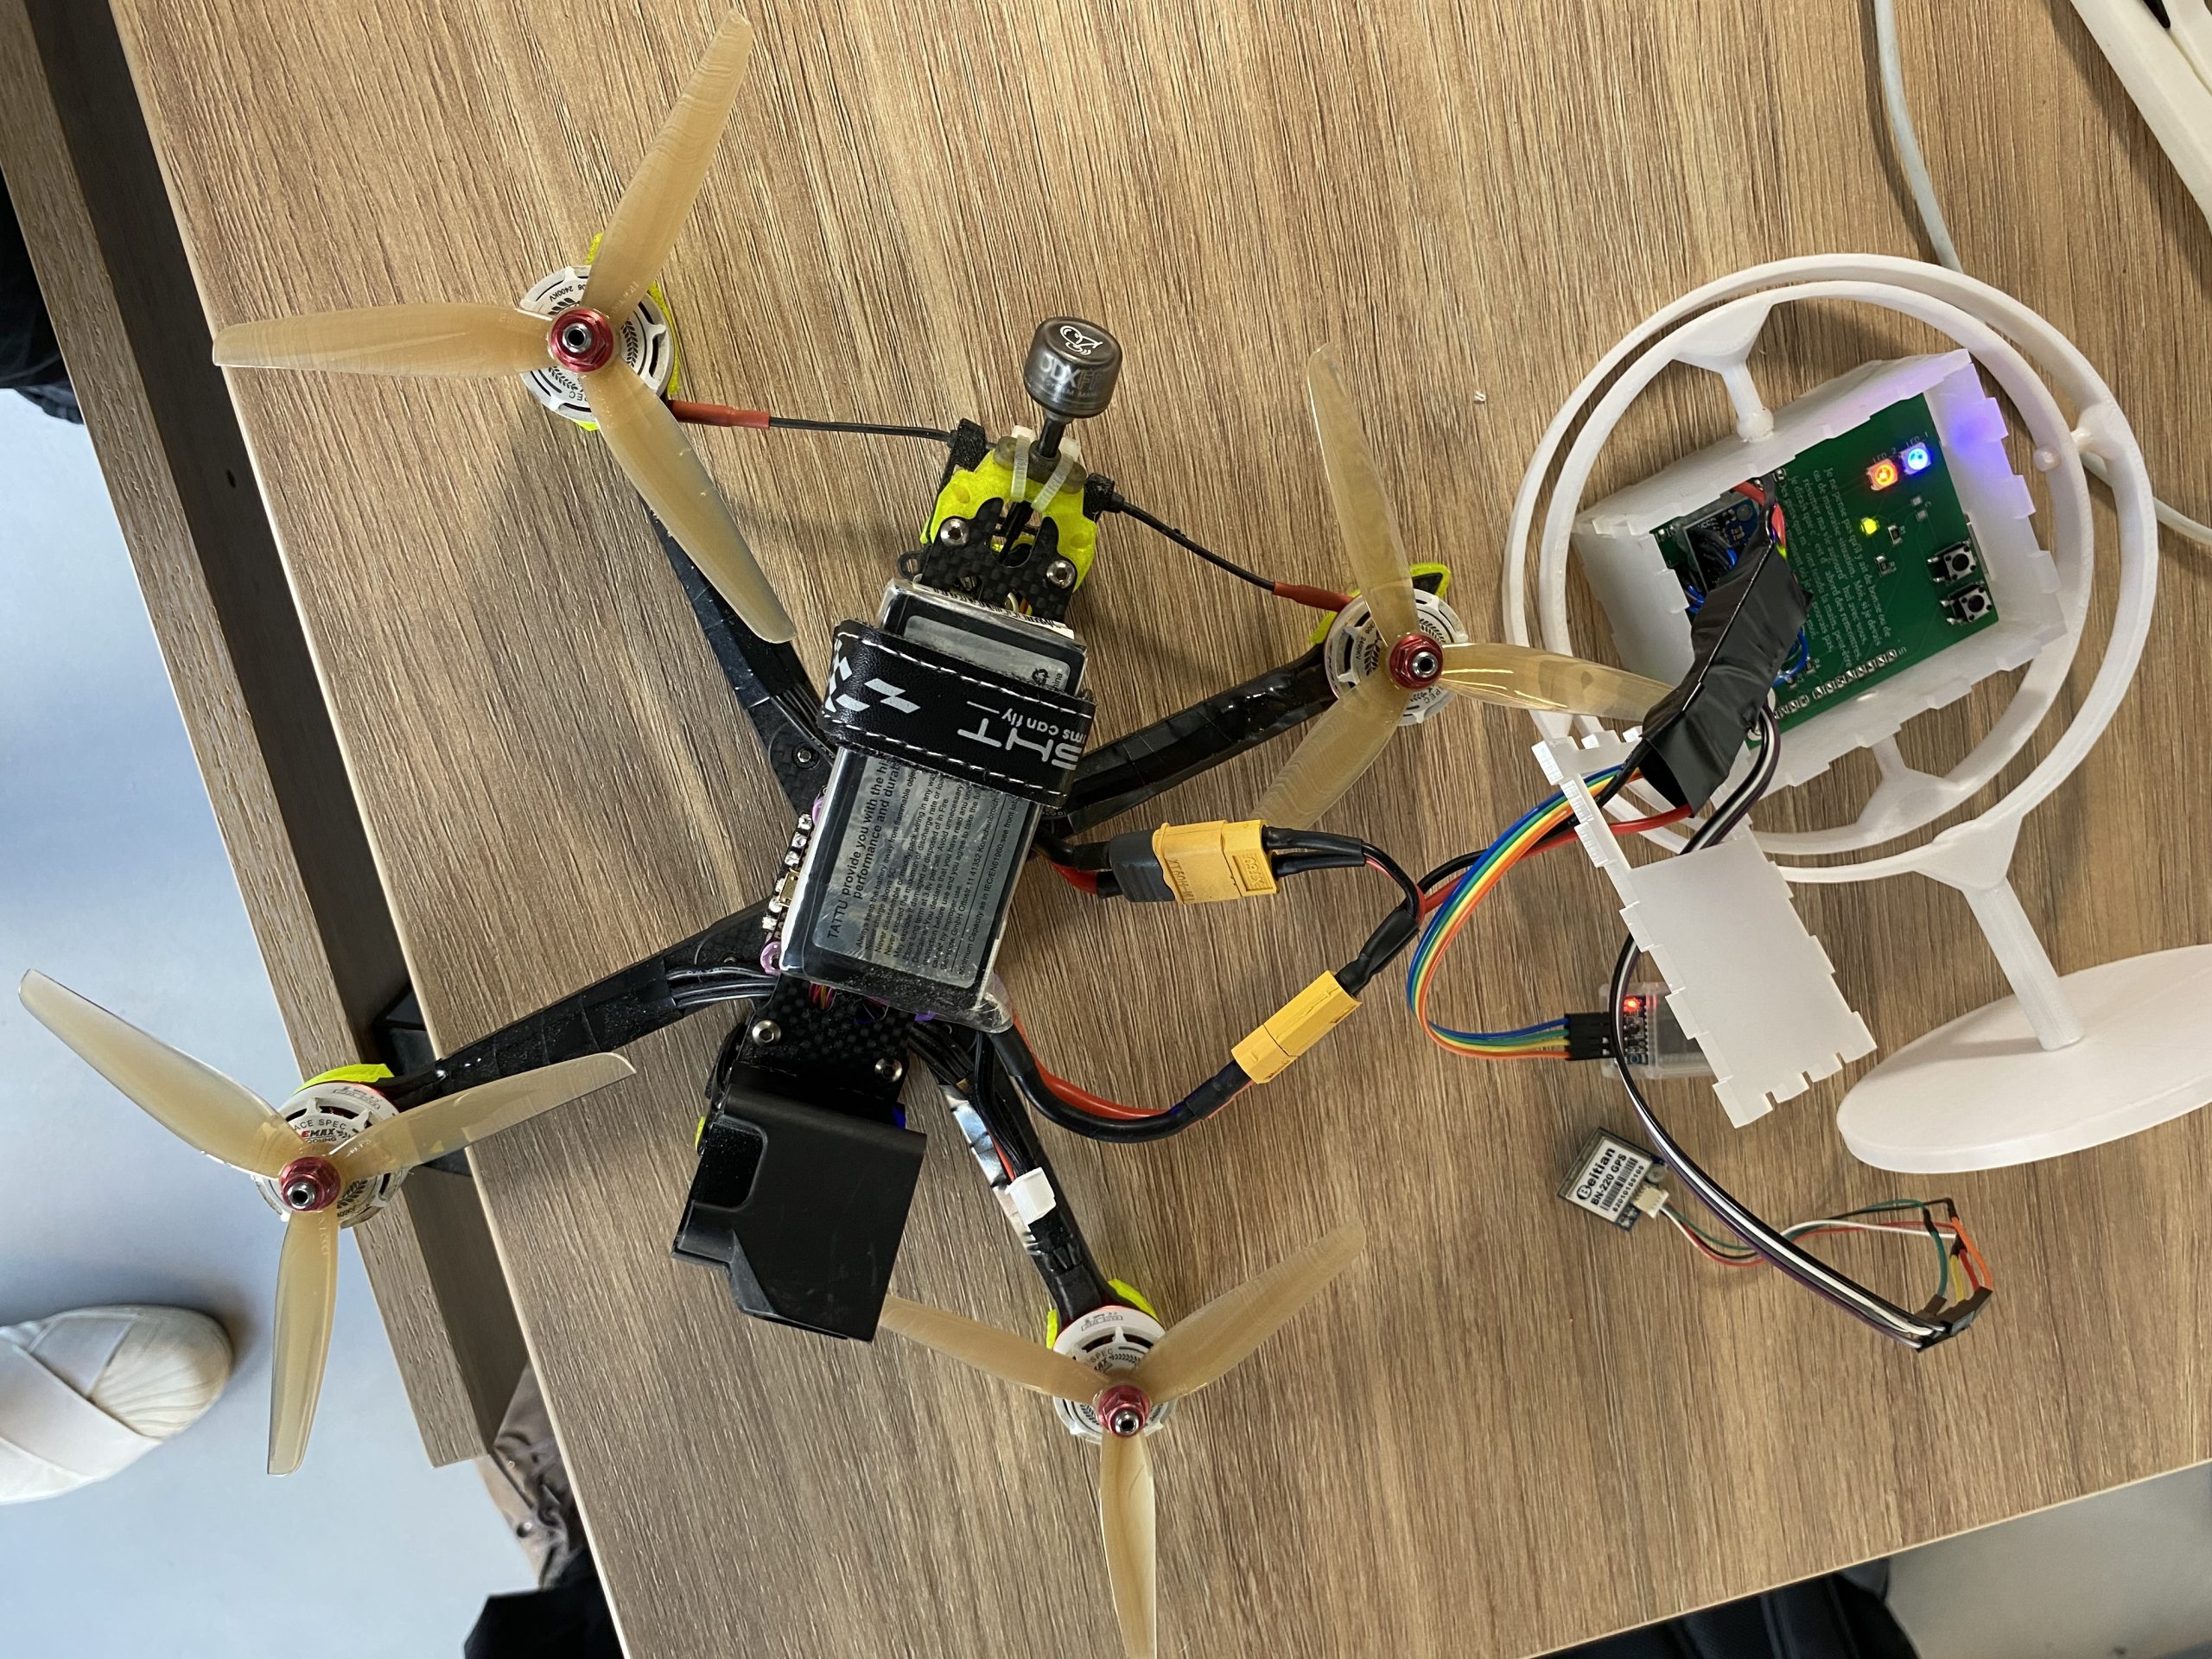 Drone cours prototypage